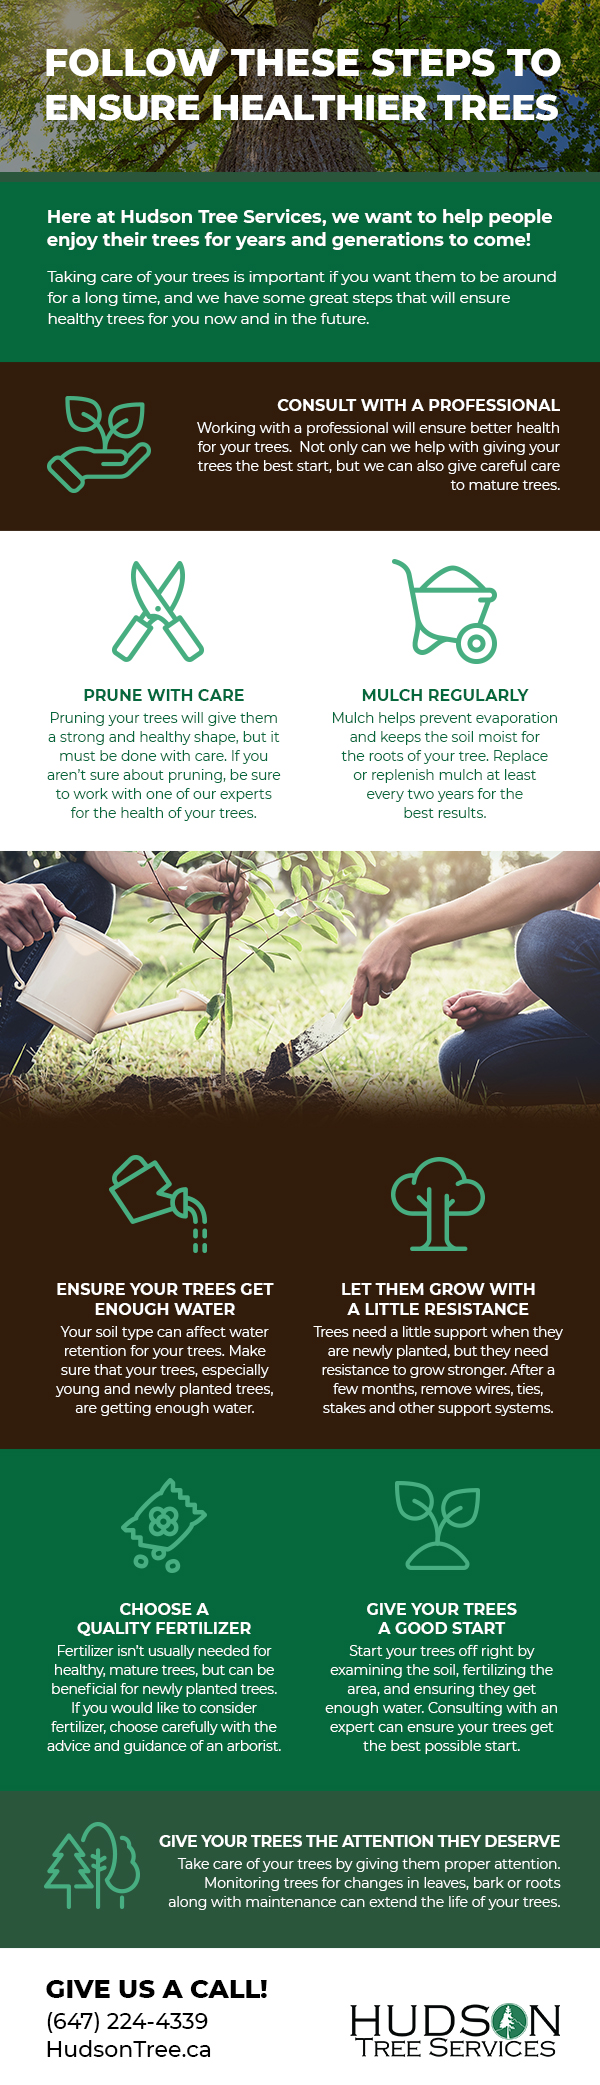 Follow These Steps to Ensure Healthier Trees [infographic]